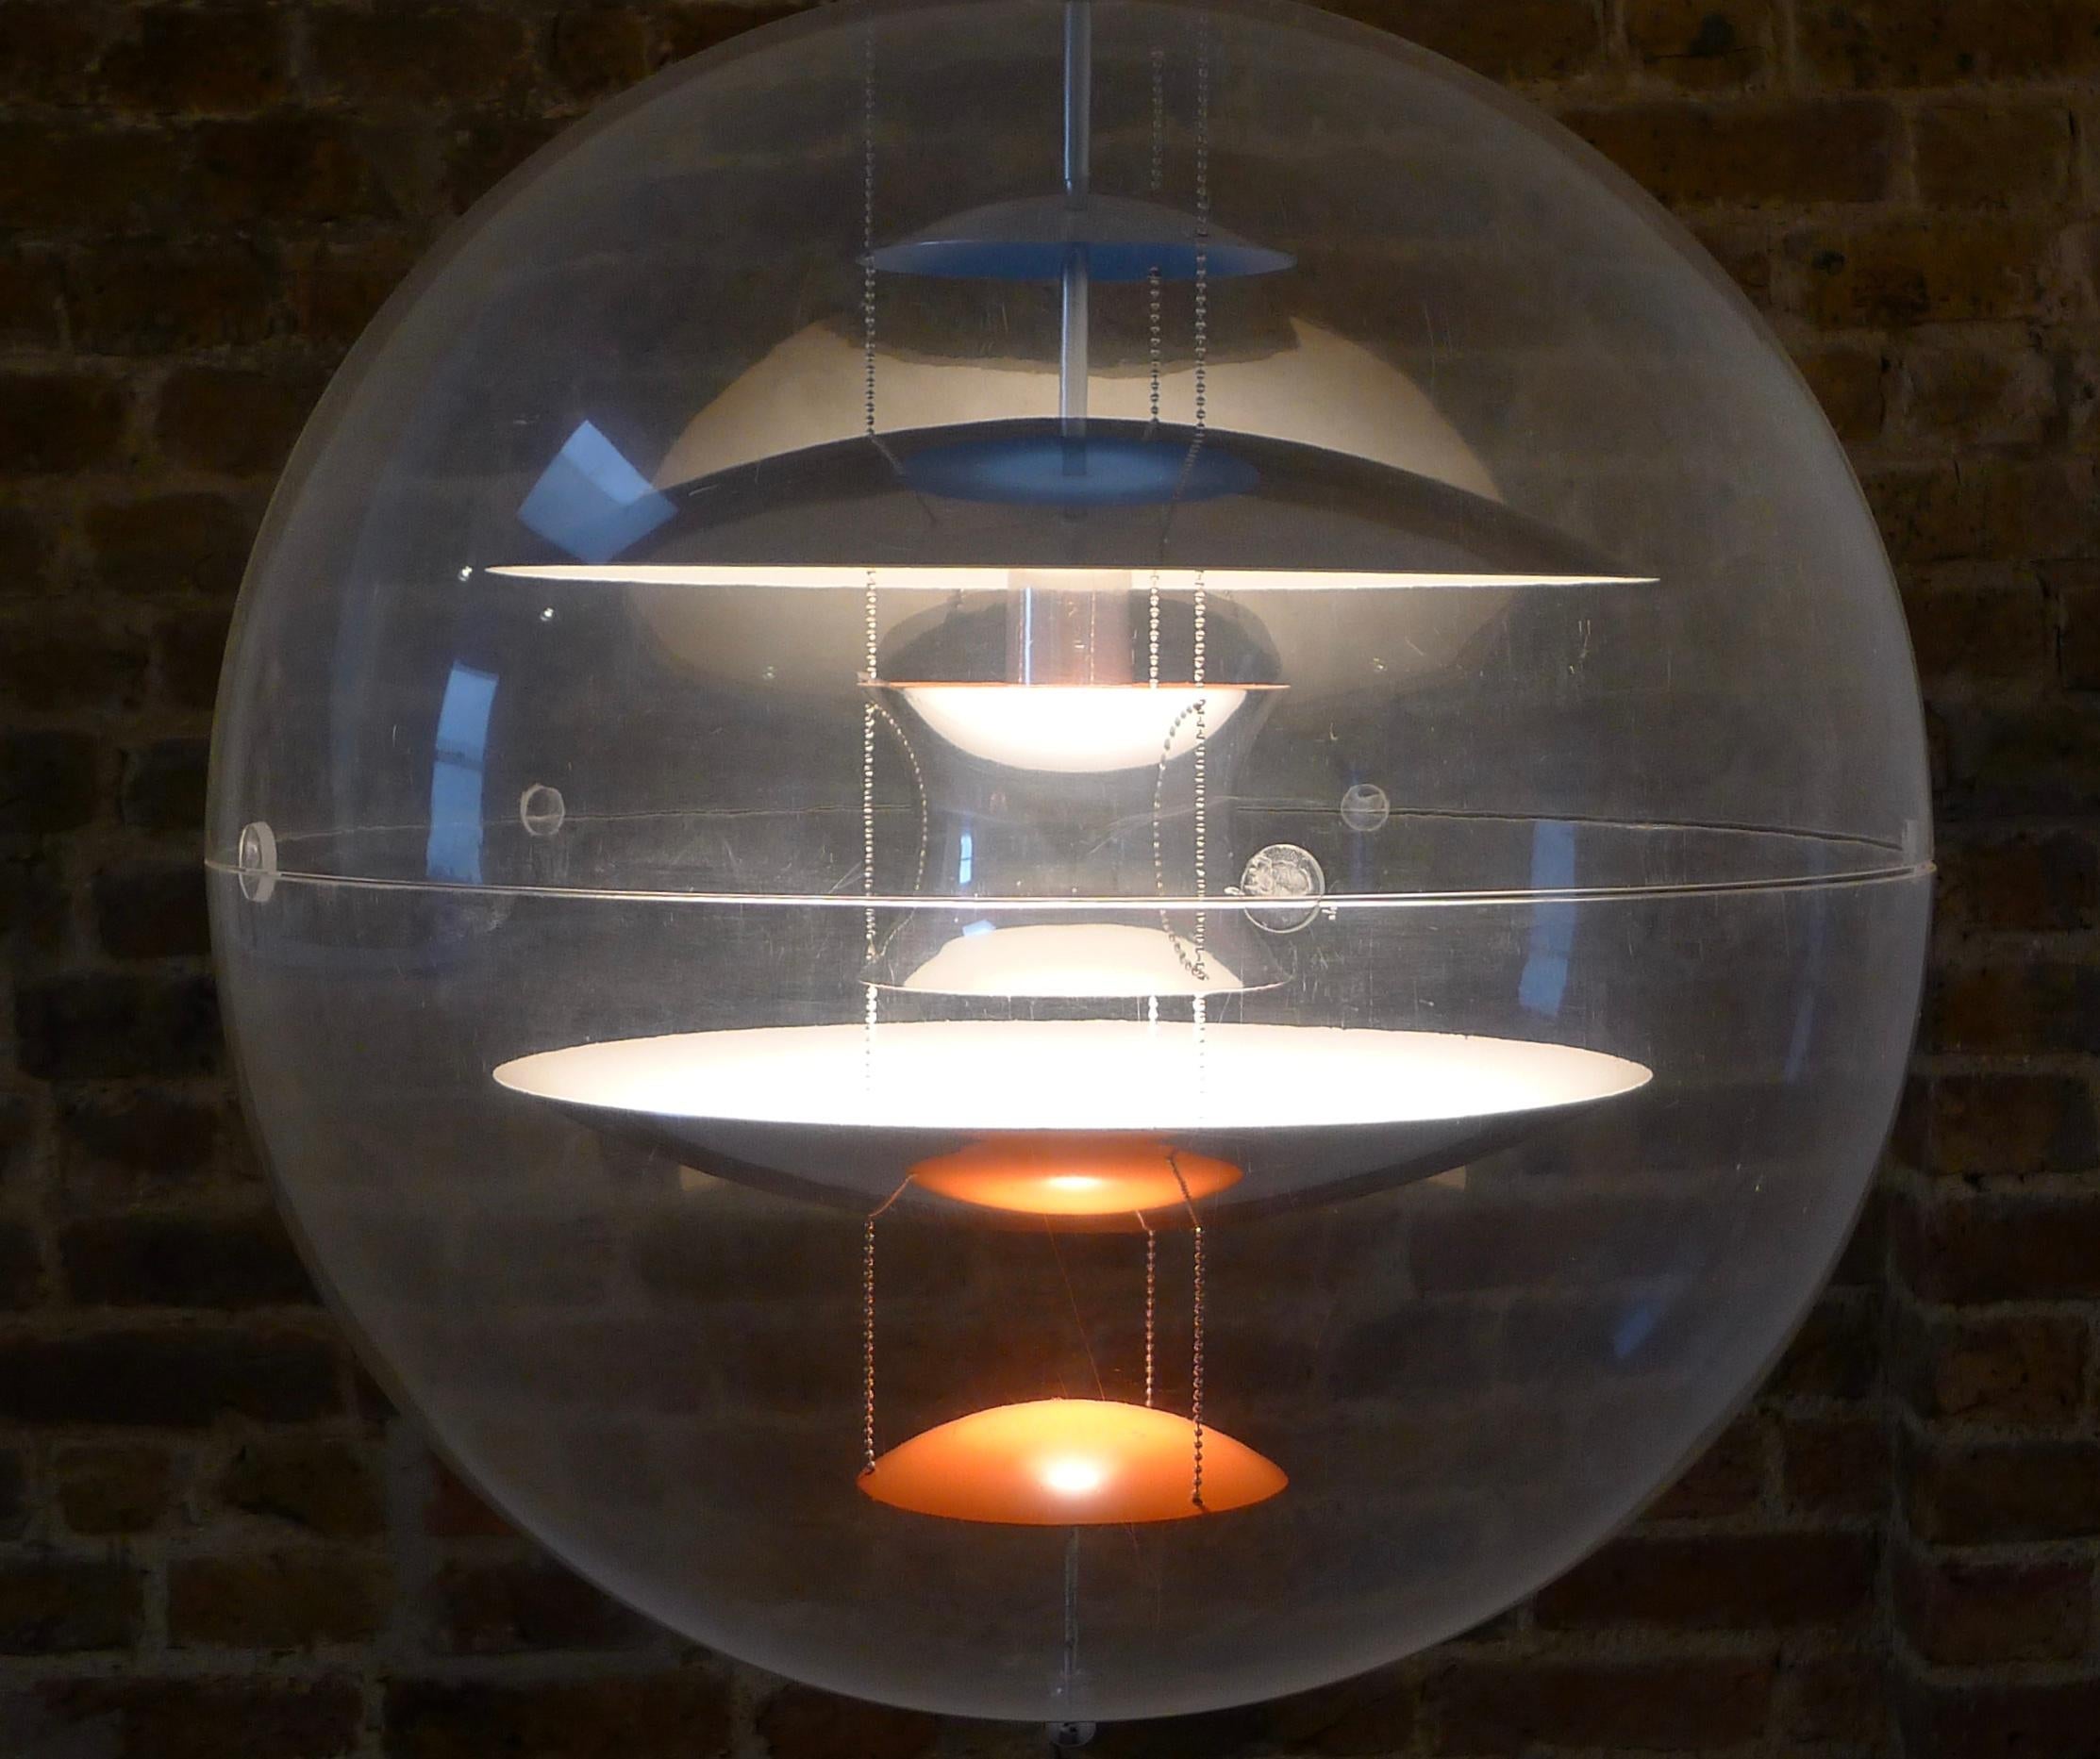 Verner Panton for Louis Poulsen, Denmark, 1960s . An early production VP Globe lamp of Perspex and lacquered steel.
Never re-issued in this 60cm size this lamp is from the original production run in the 1960s. 

Some light scratching on the